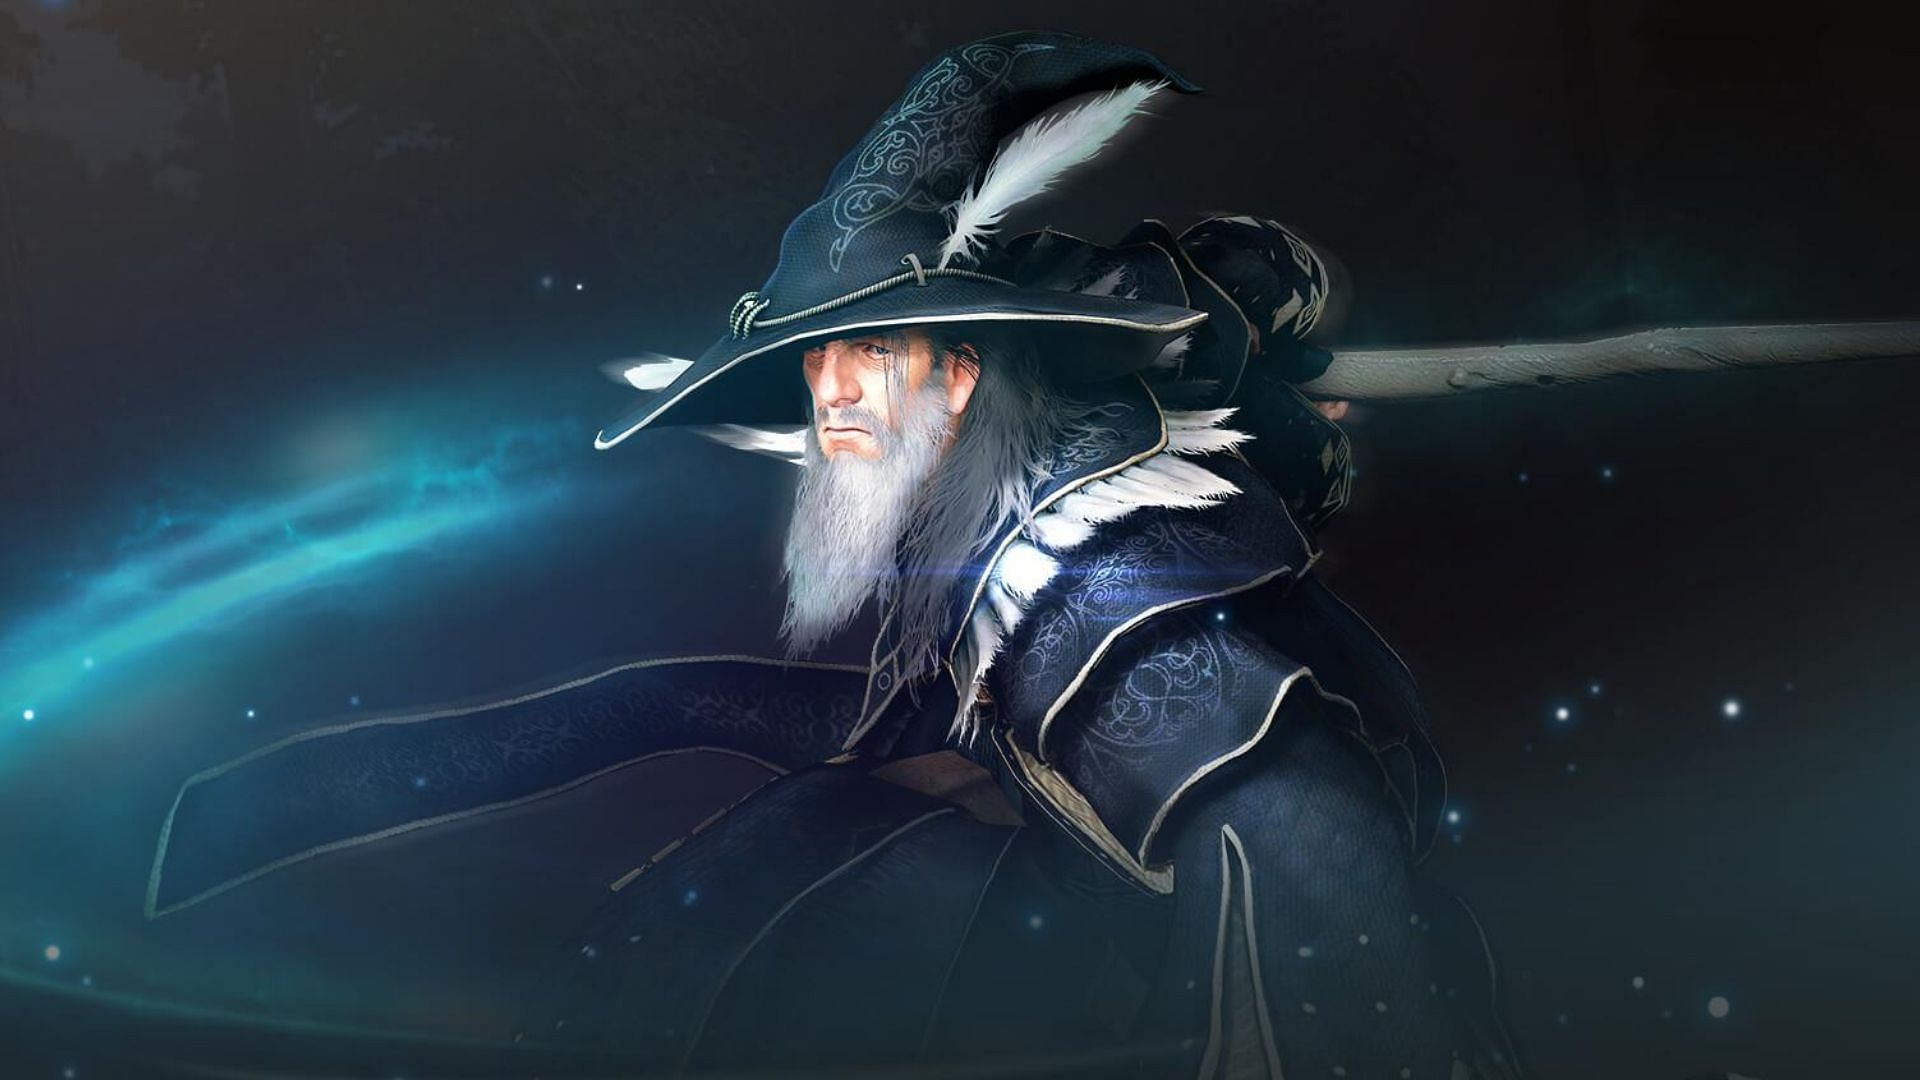 The Wizard is really powerful in Black Desert Online (Image via Pearl Abyss)